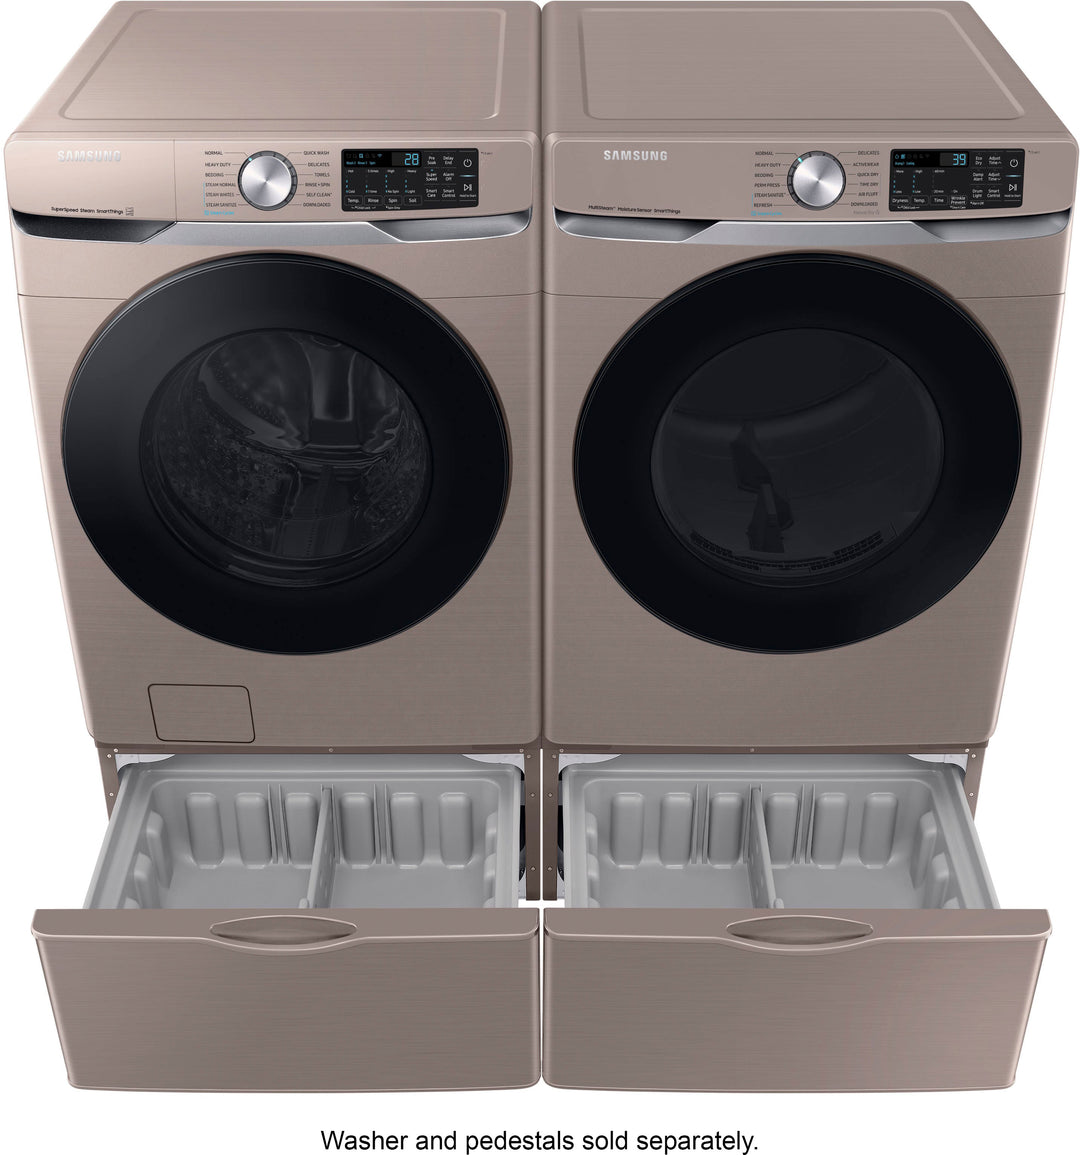 Samsung - 7.5 cu. ft. Smart Electric Dryer with Steam Sanitize+ - Champagne_11